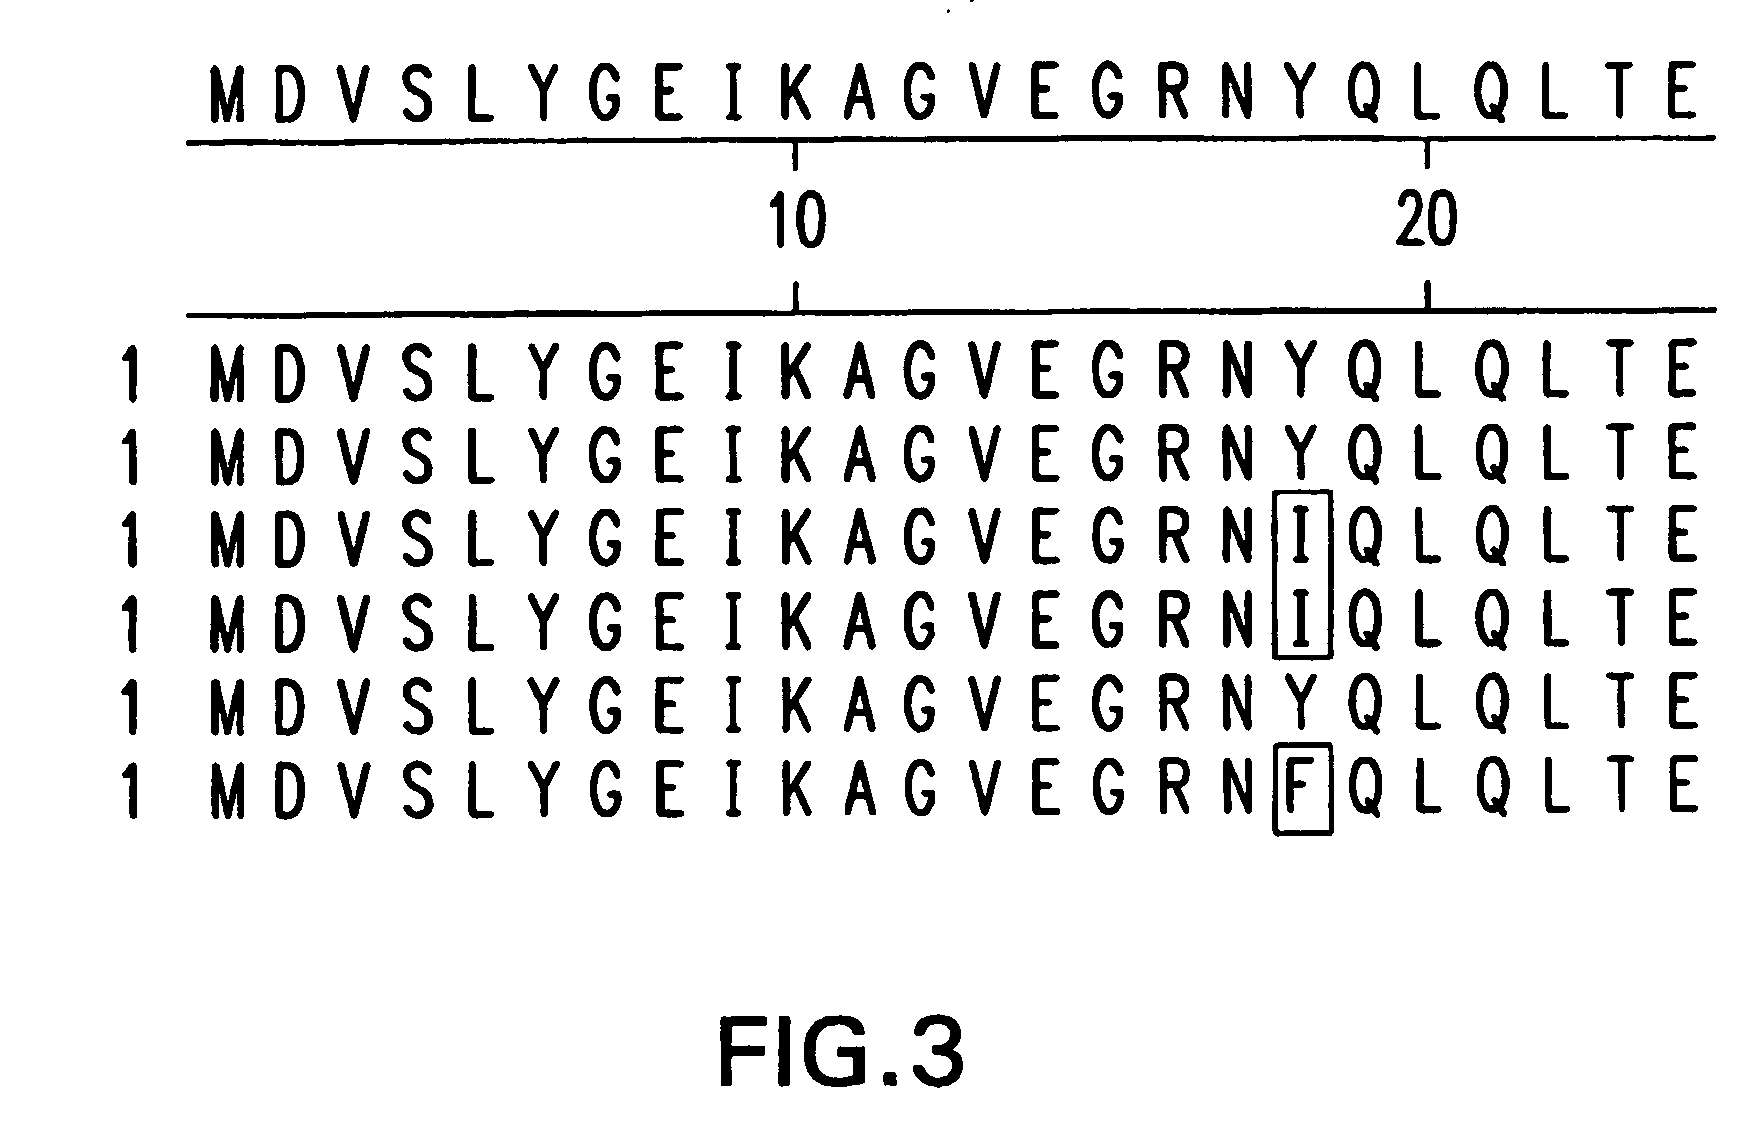 Methods for increasing neisseria protein expression and compositions thereof